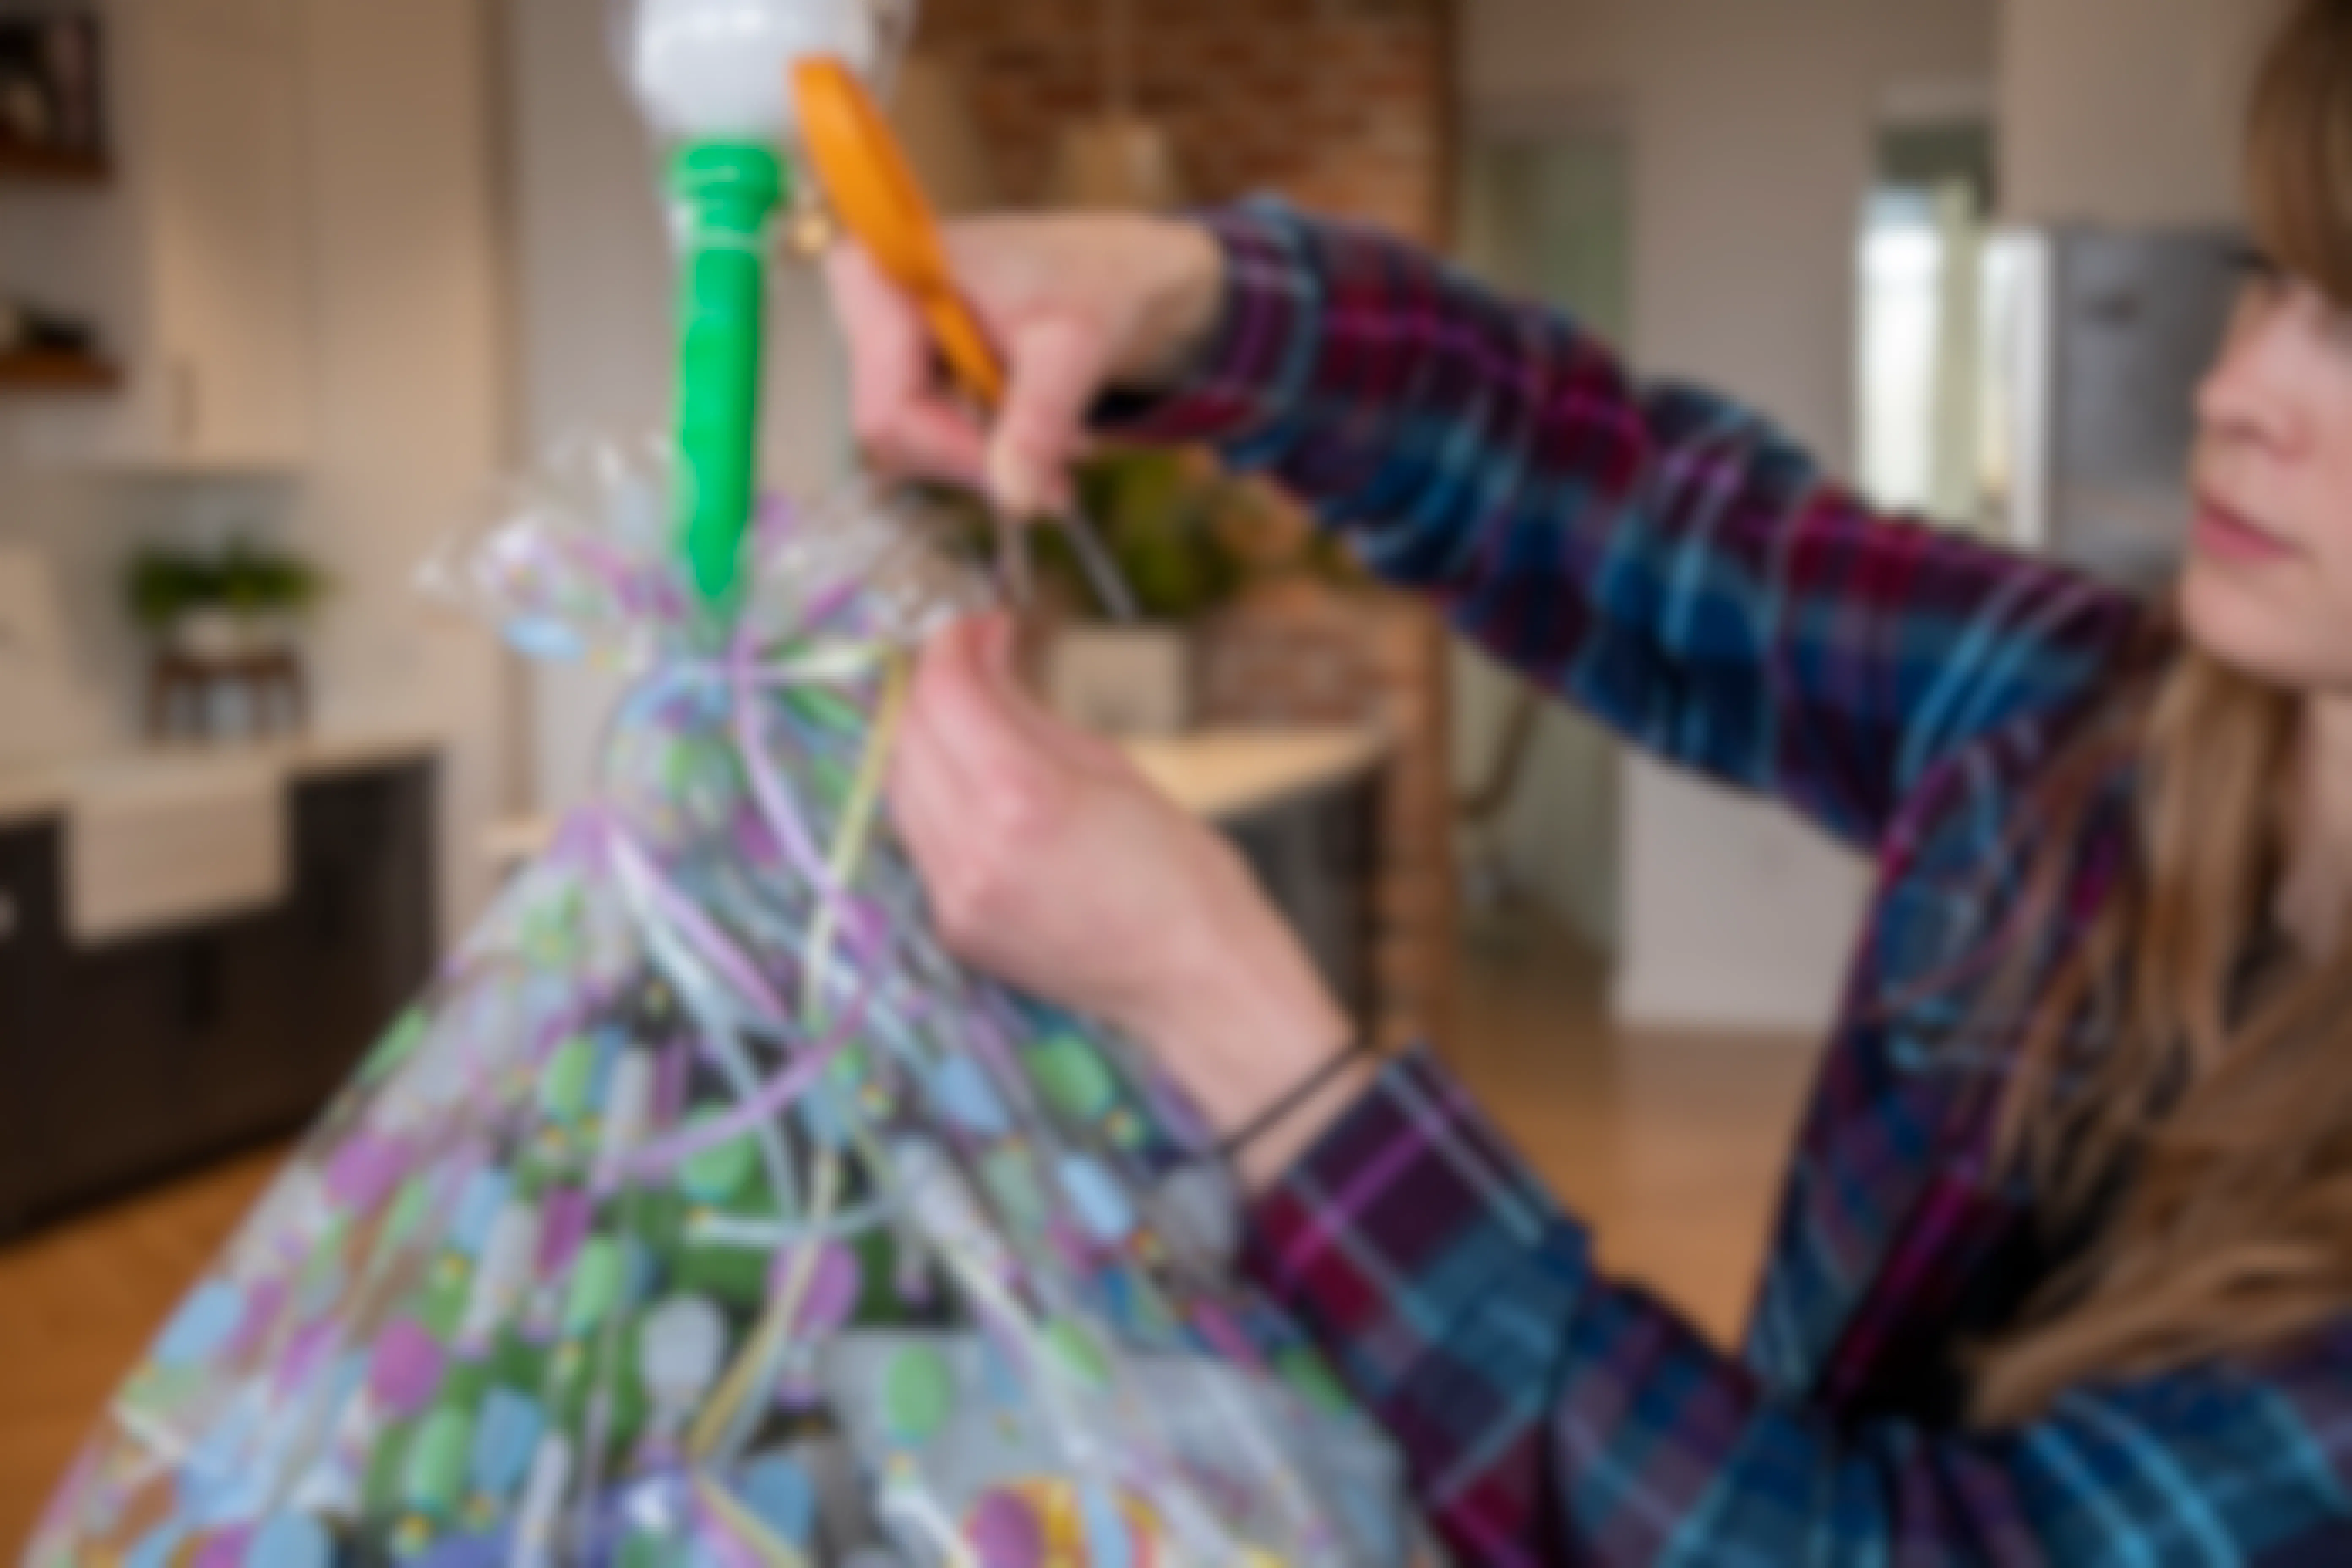 A woman uses orange handled scissors to curl ribbon tied at the top of an Easter basket